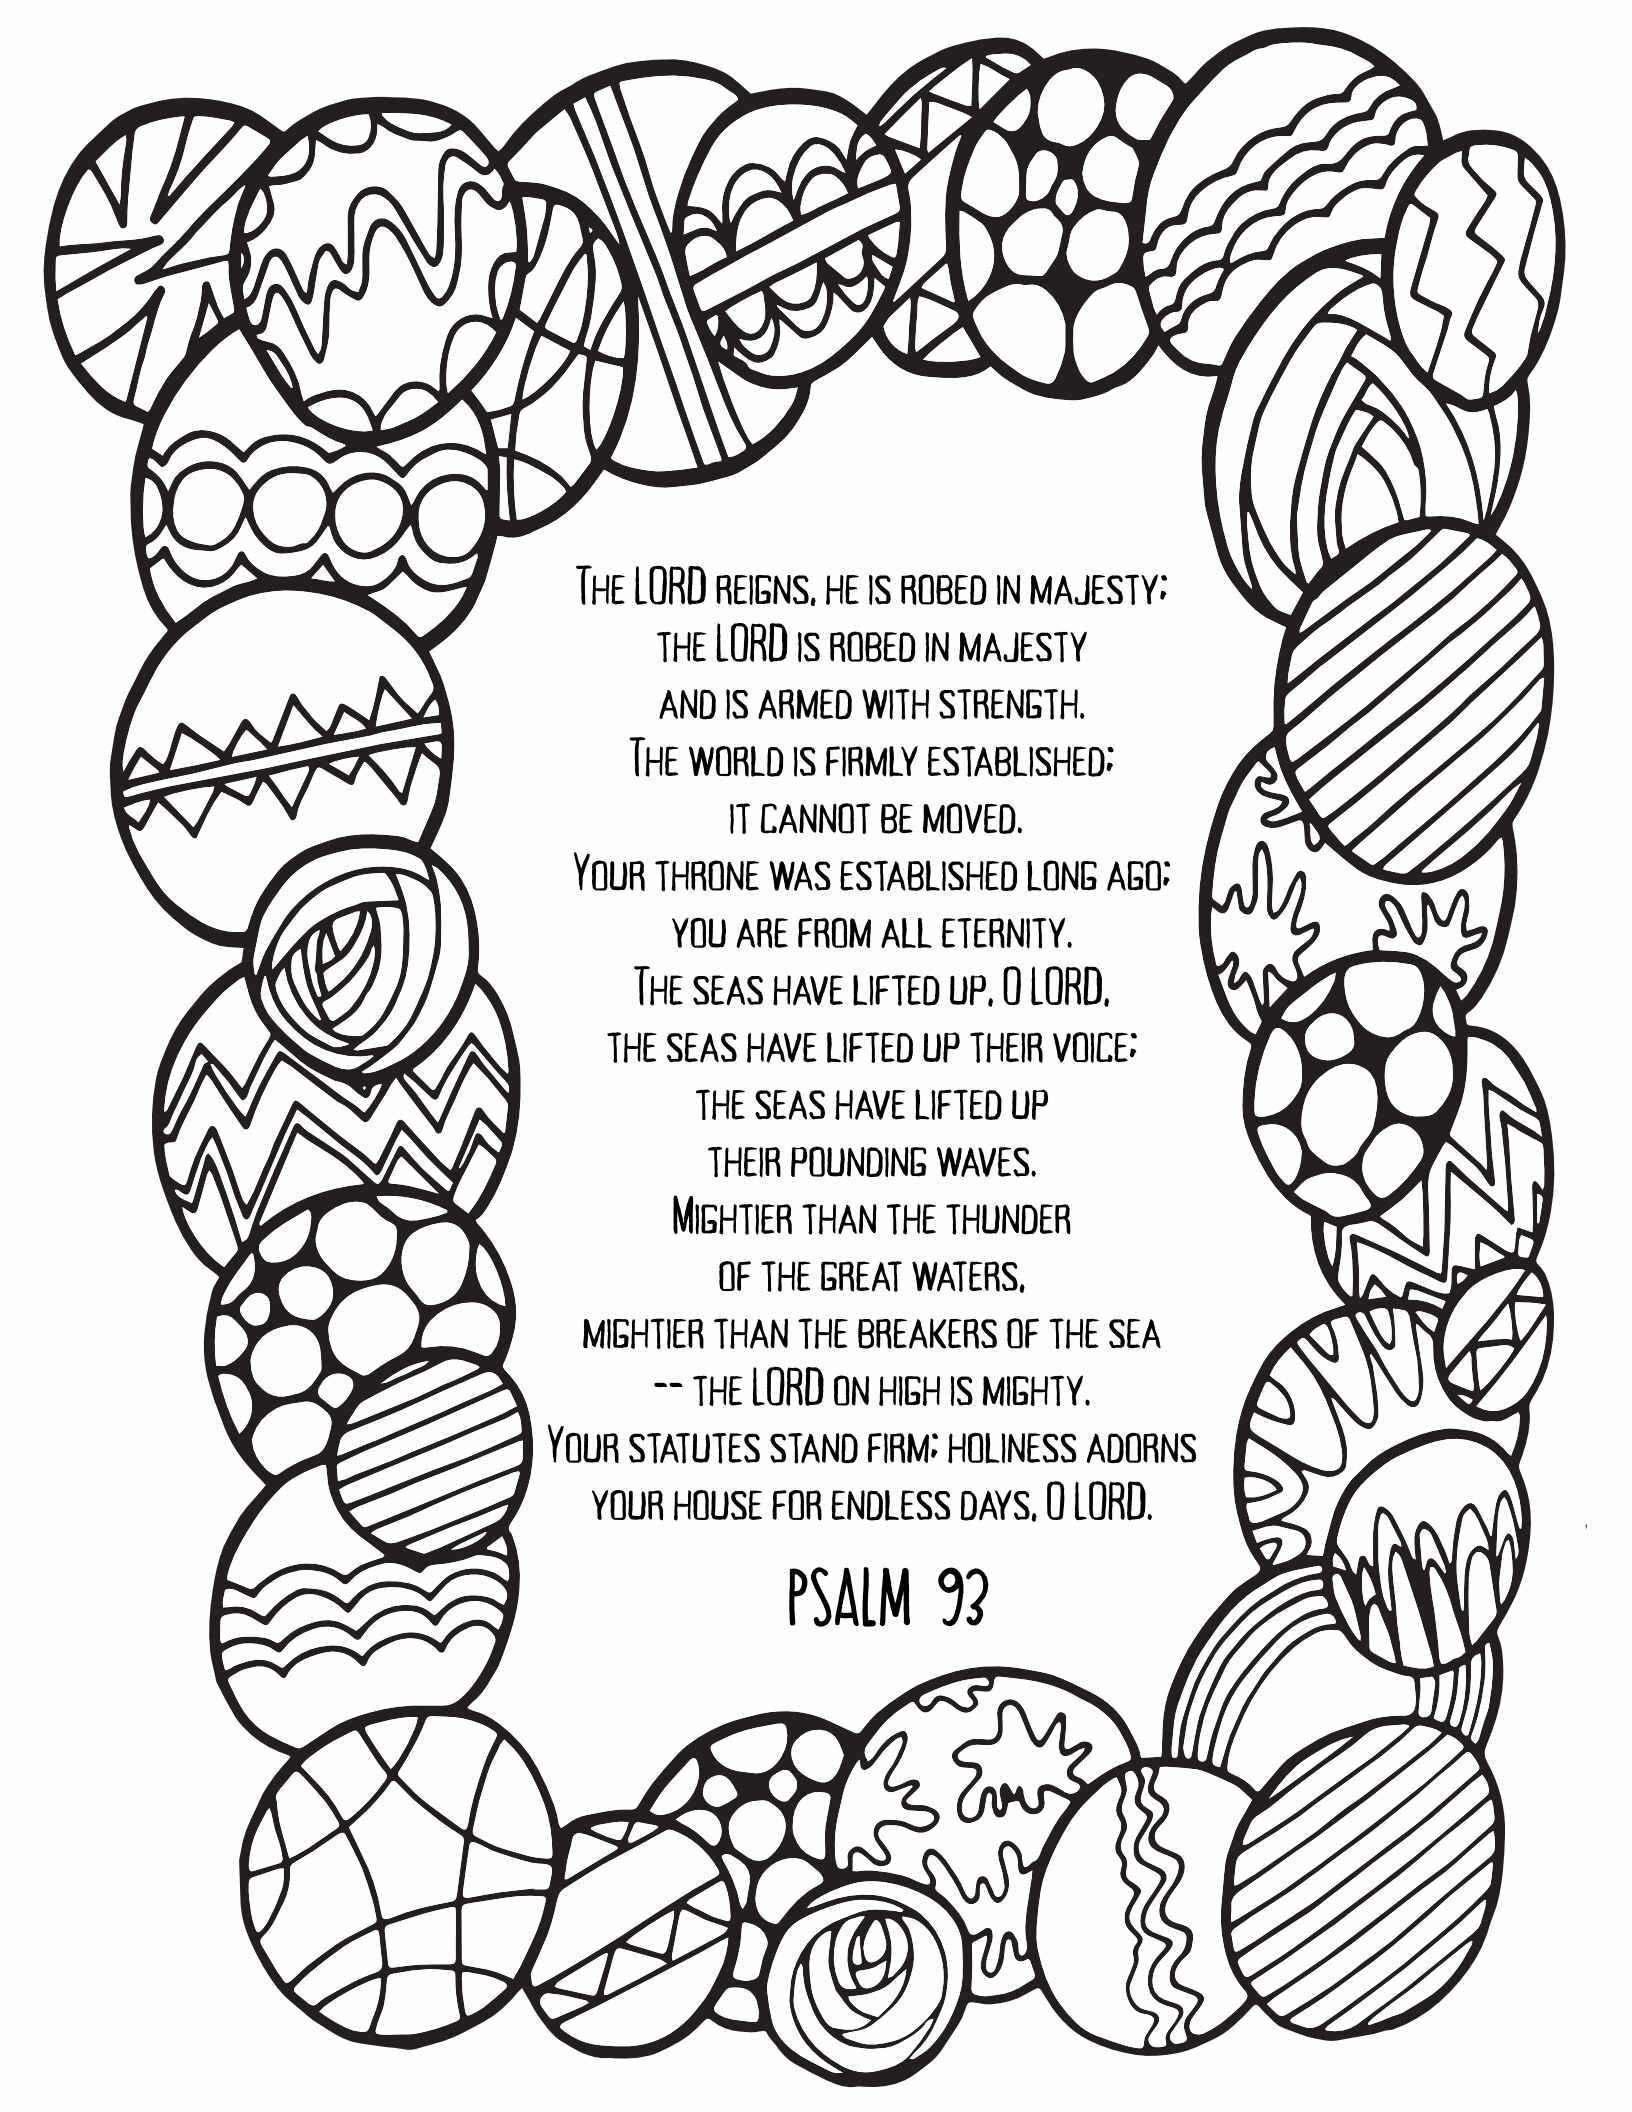 10 Free Printable Psalm Coloring Pages - Download and Color Adult Scripture - Psalm 93CLICK HERE TO DOWNLOAD THIS PAGE FREE